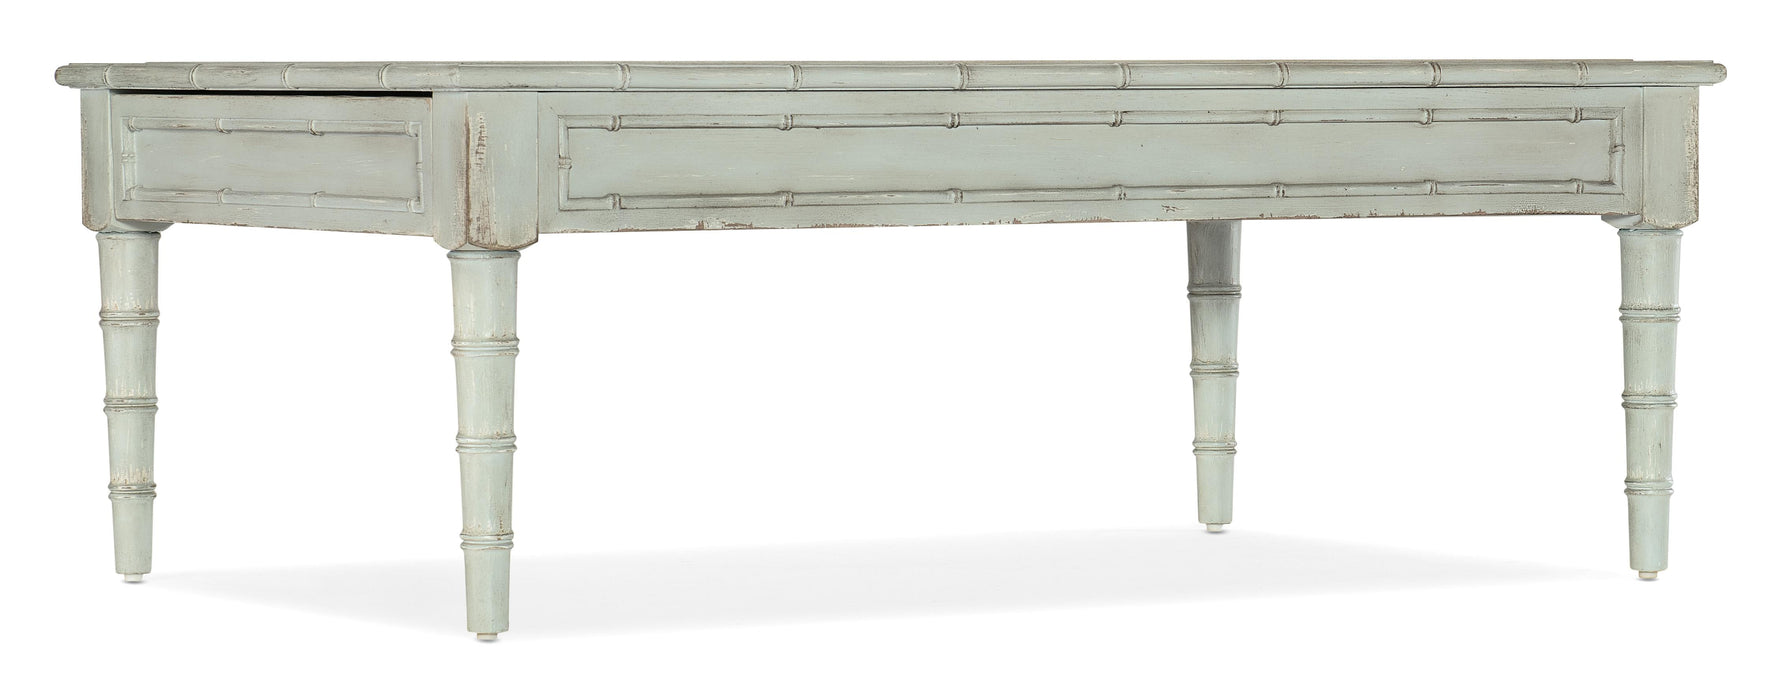 Charleston Rectangle Cocktail Table - 6750-80310-40